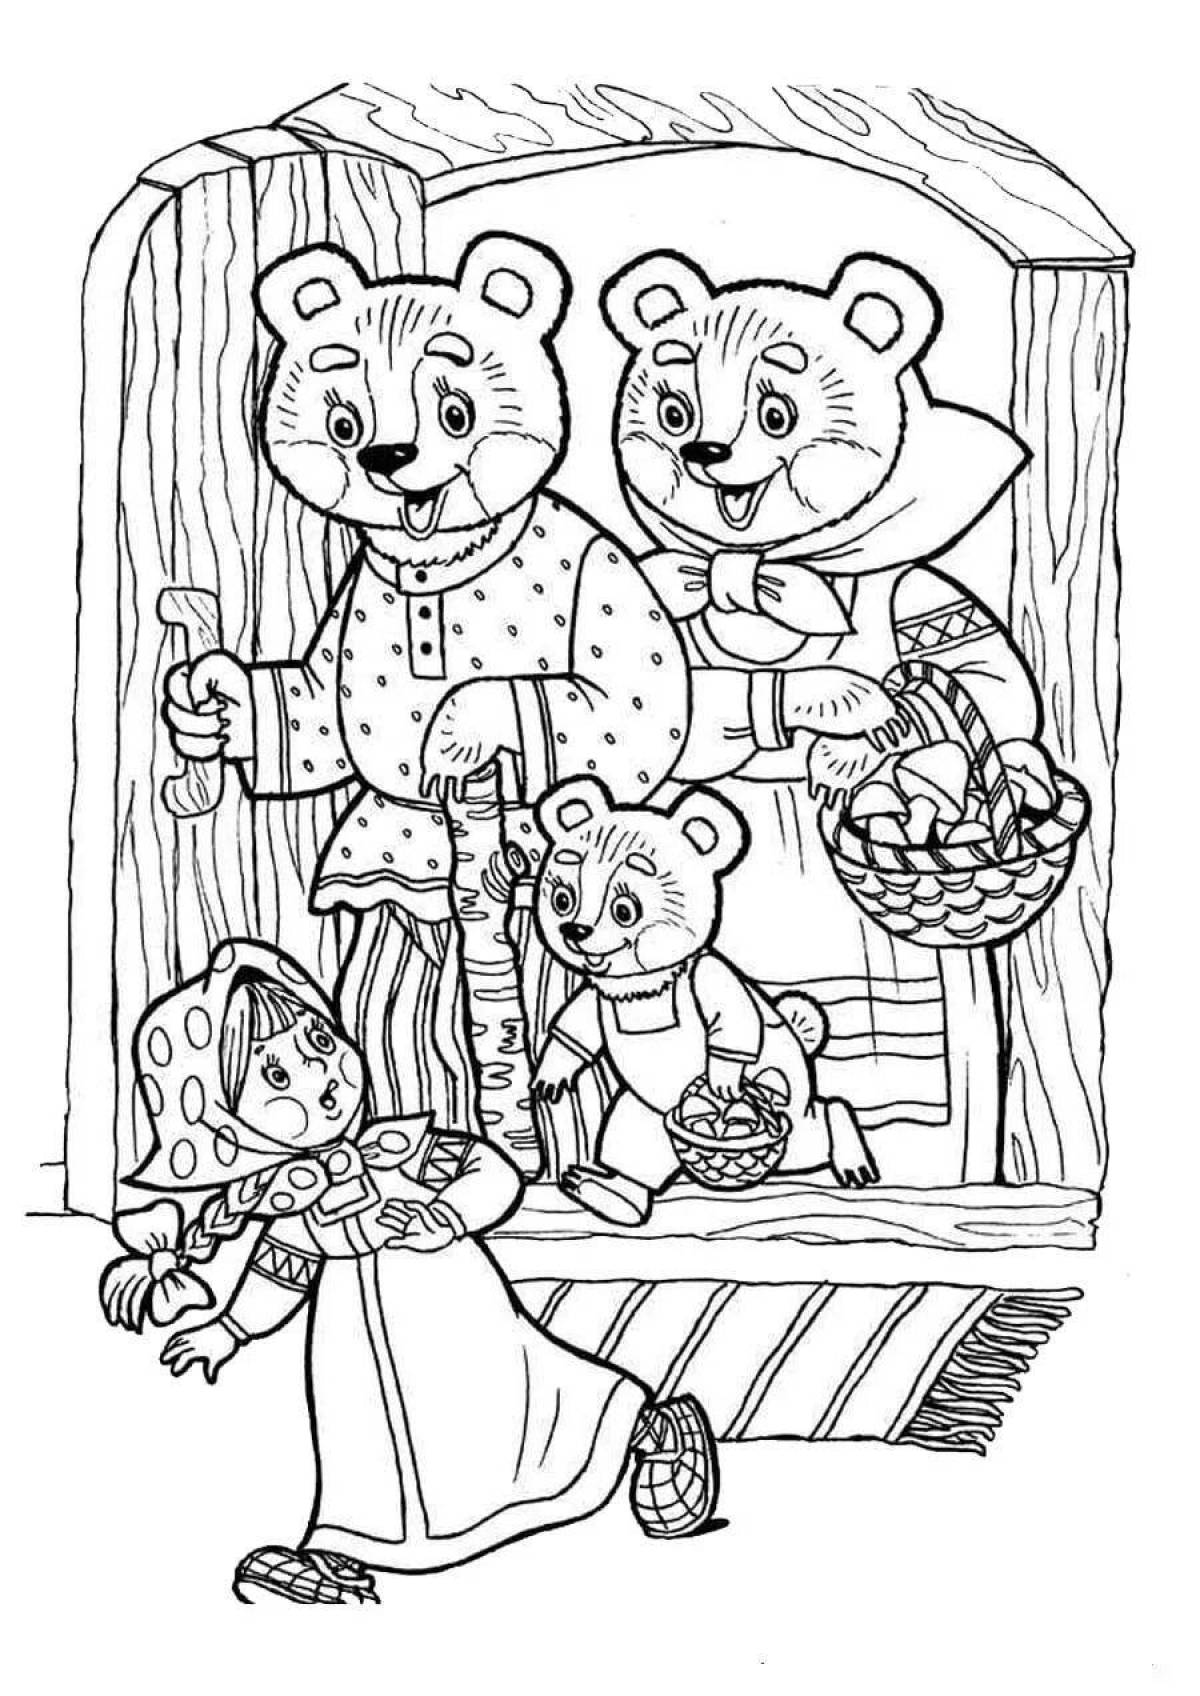 3 bears funny coloring book for babies